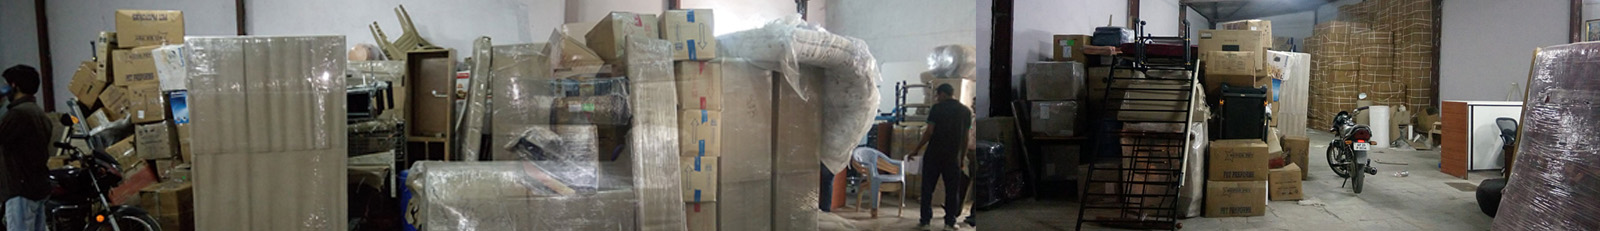 GI Cargo Packers and Movers Services Bangalore